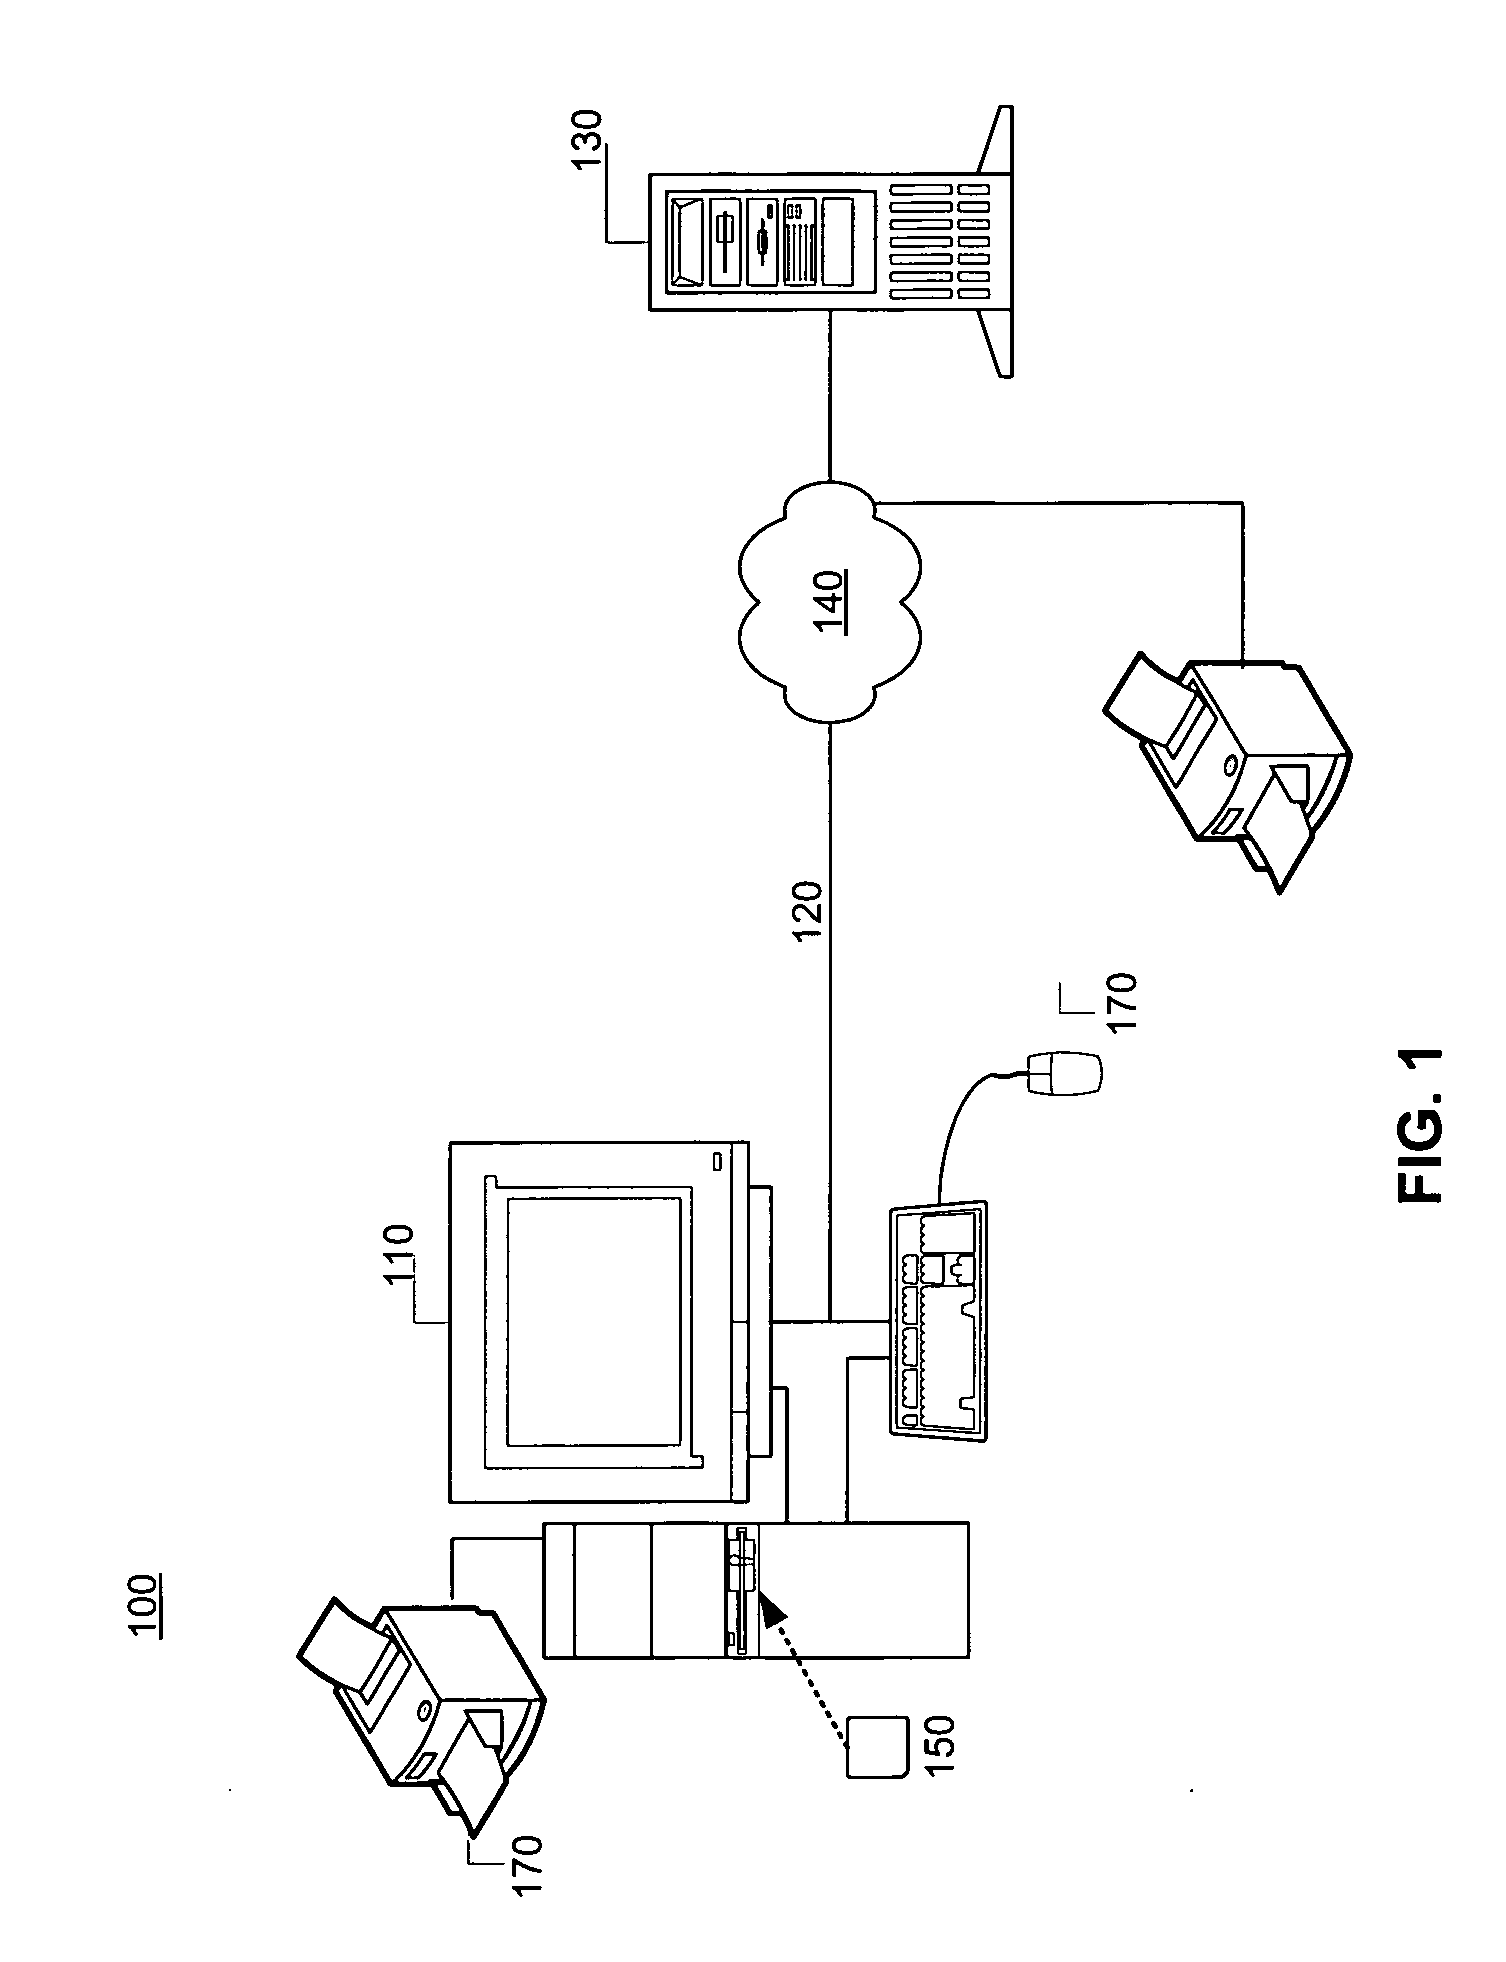 Systems and methods for display list management